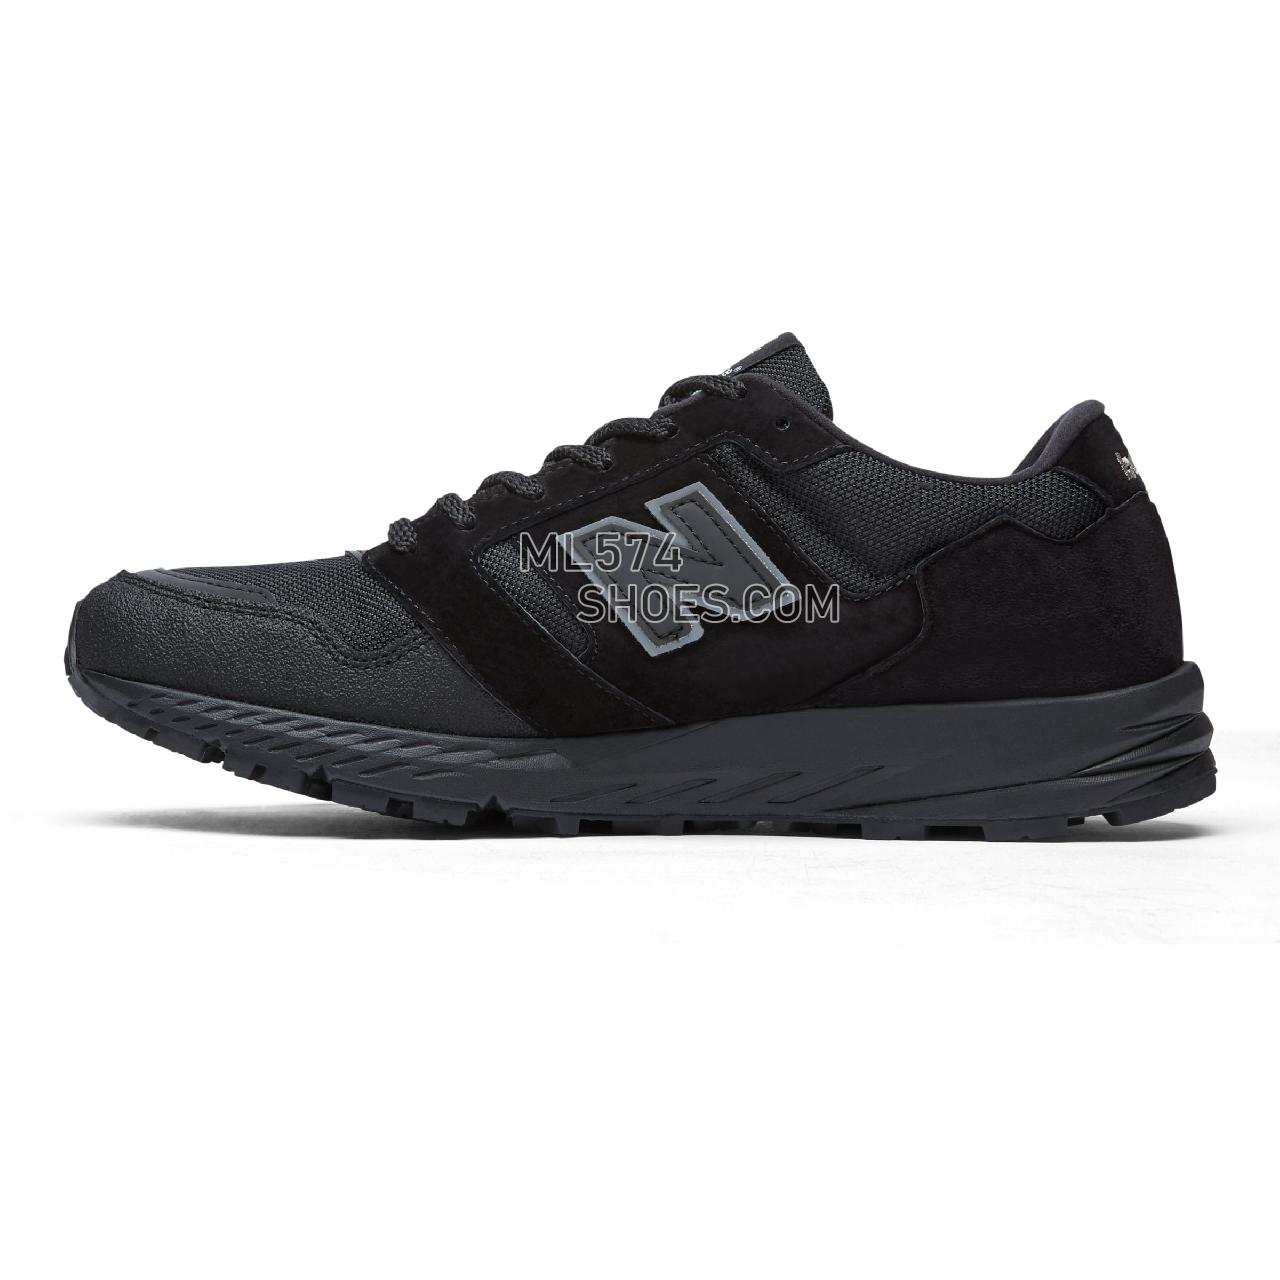 New Balance Made in UK 575 - Men's Made in UK 575 MTL575V1-27423-M - Black with Black Caviar and Lime - MTL575KL